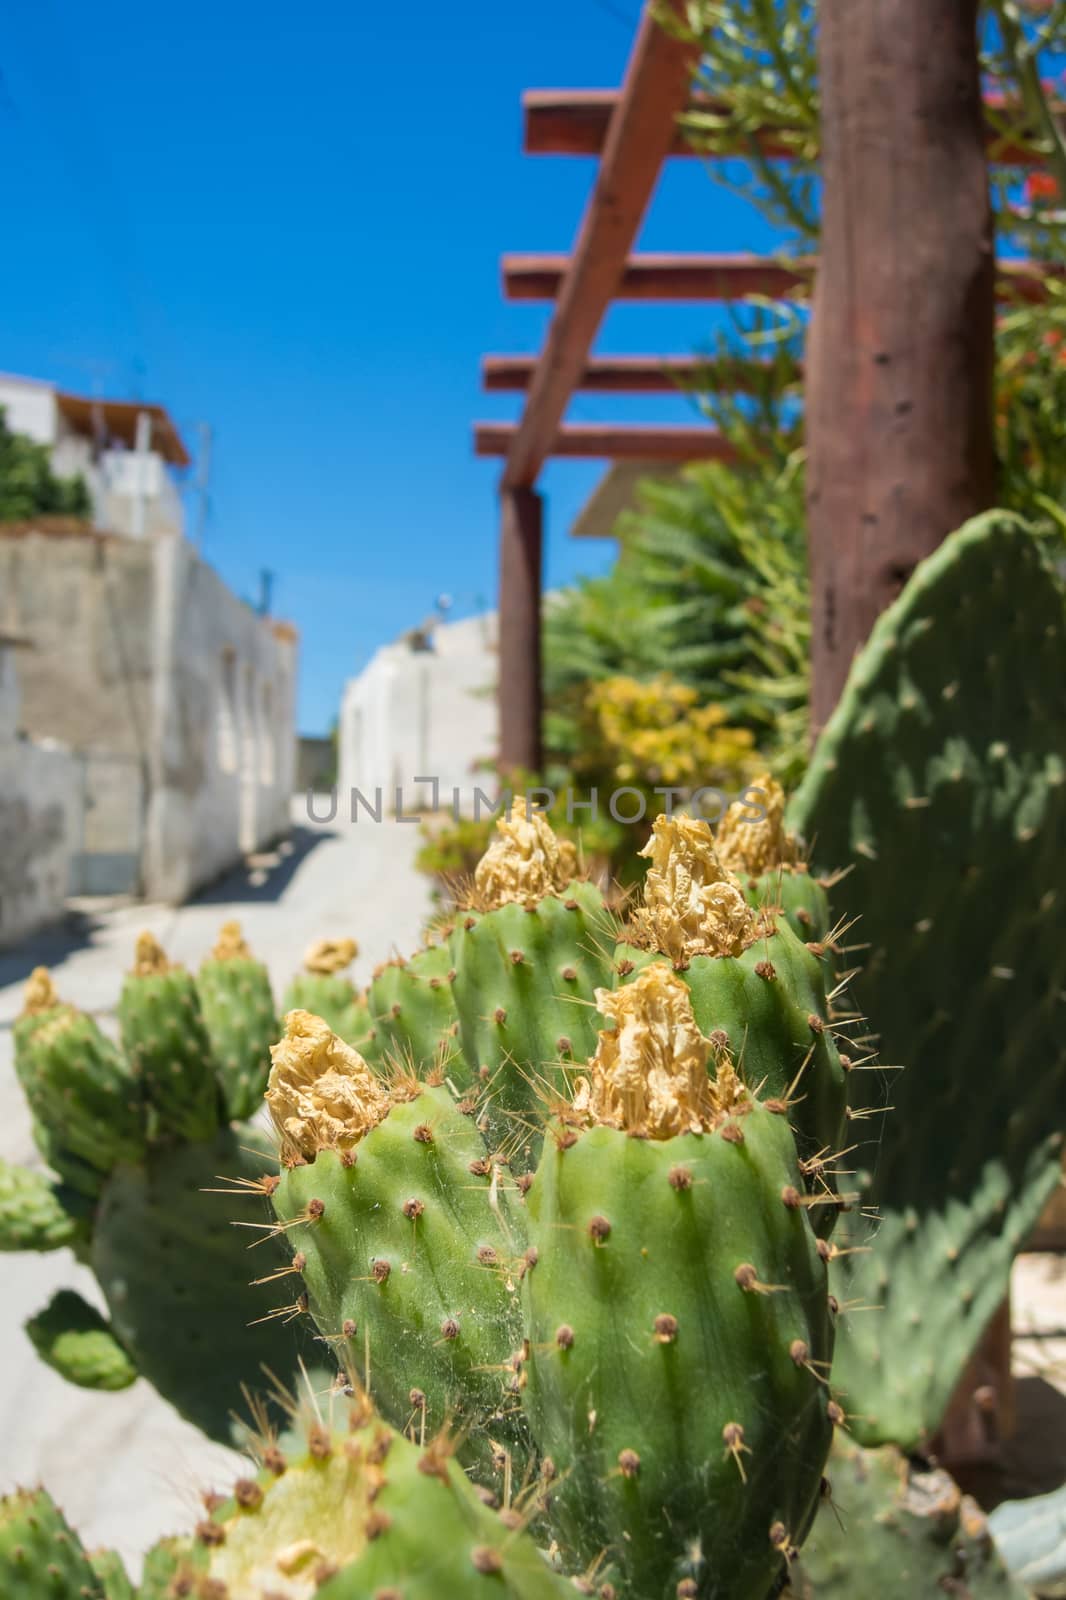 Old green Cactus in front of blurred old part of greek city cent by MXW_Stock